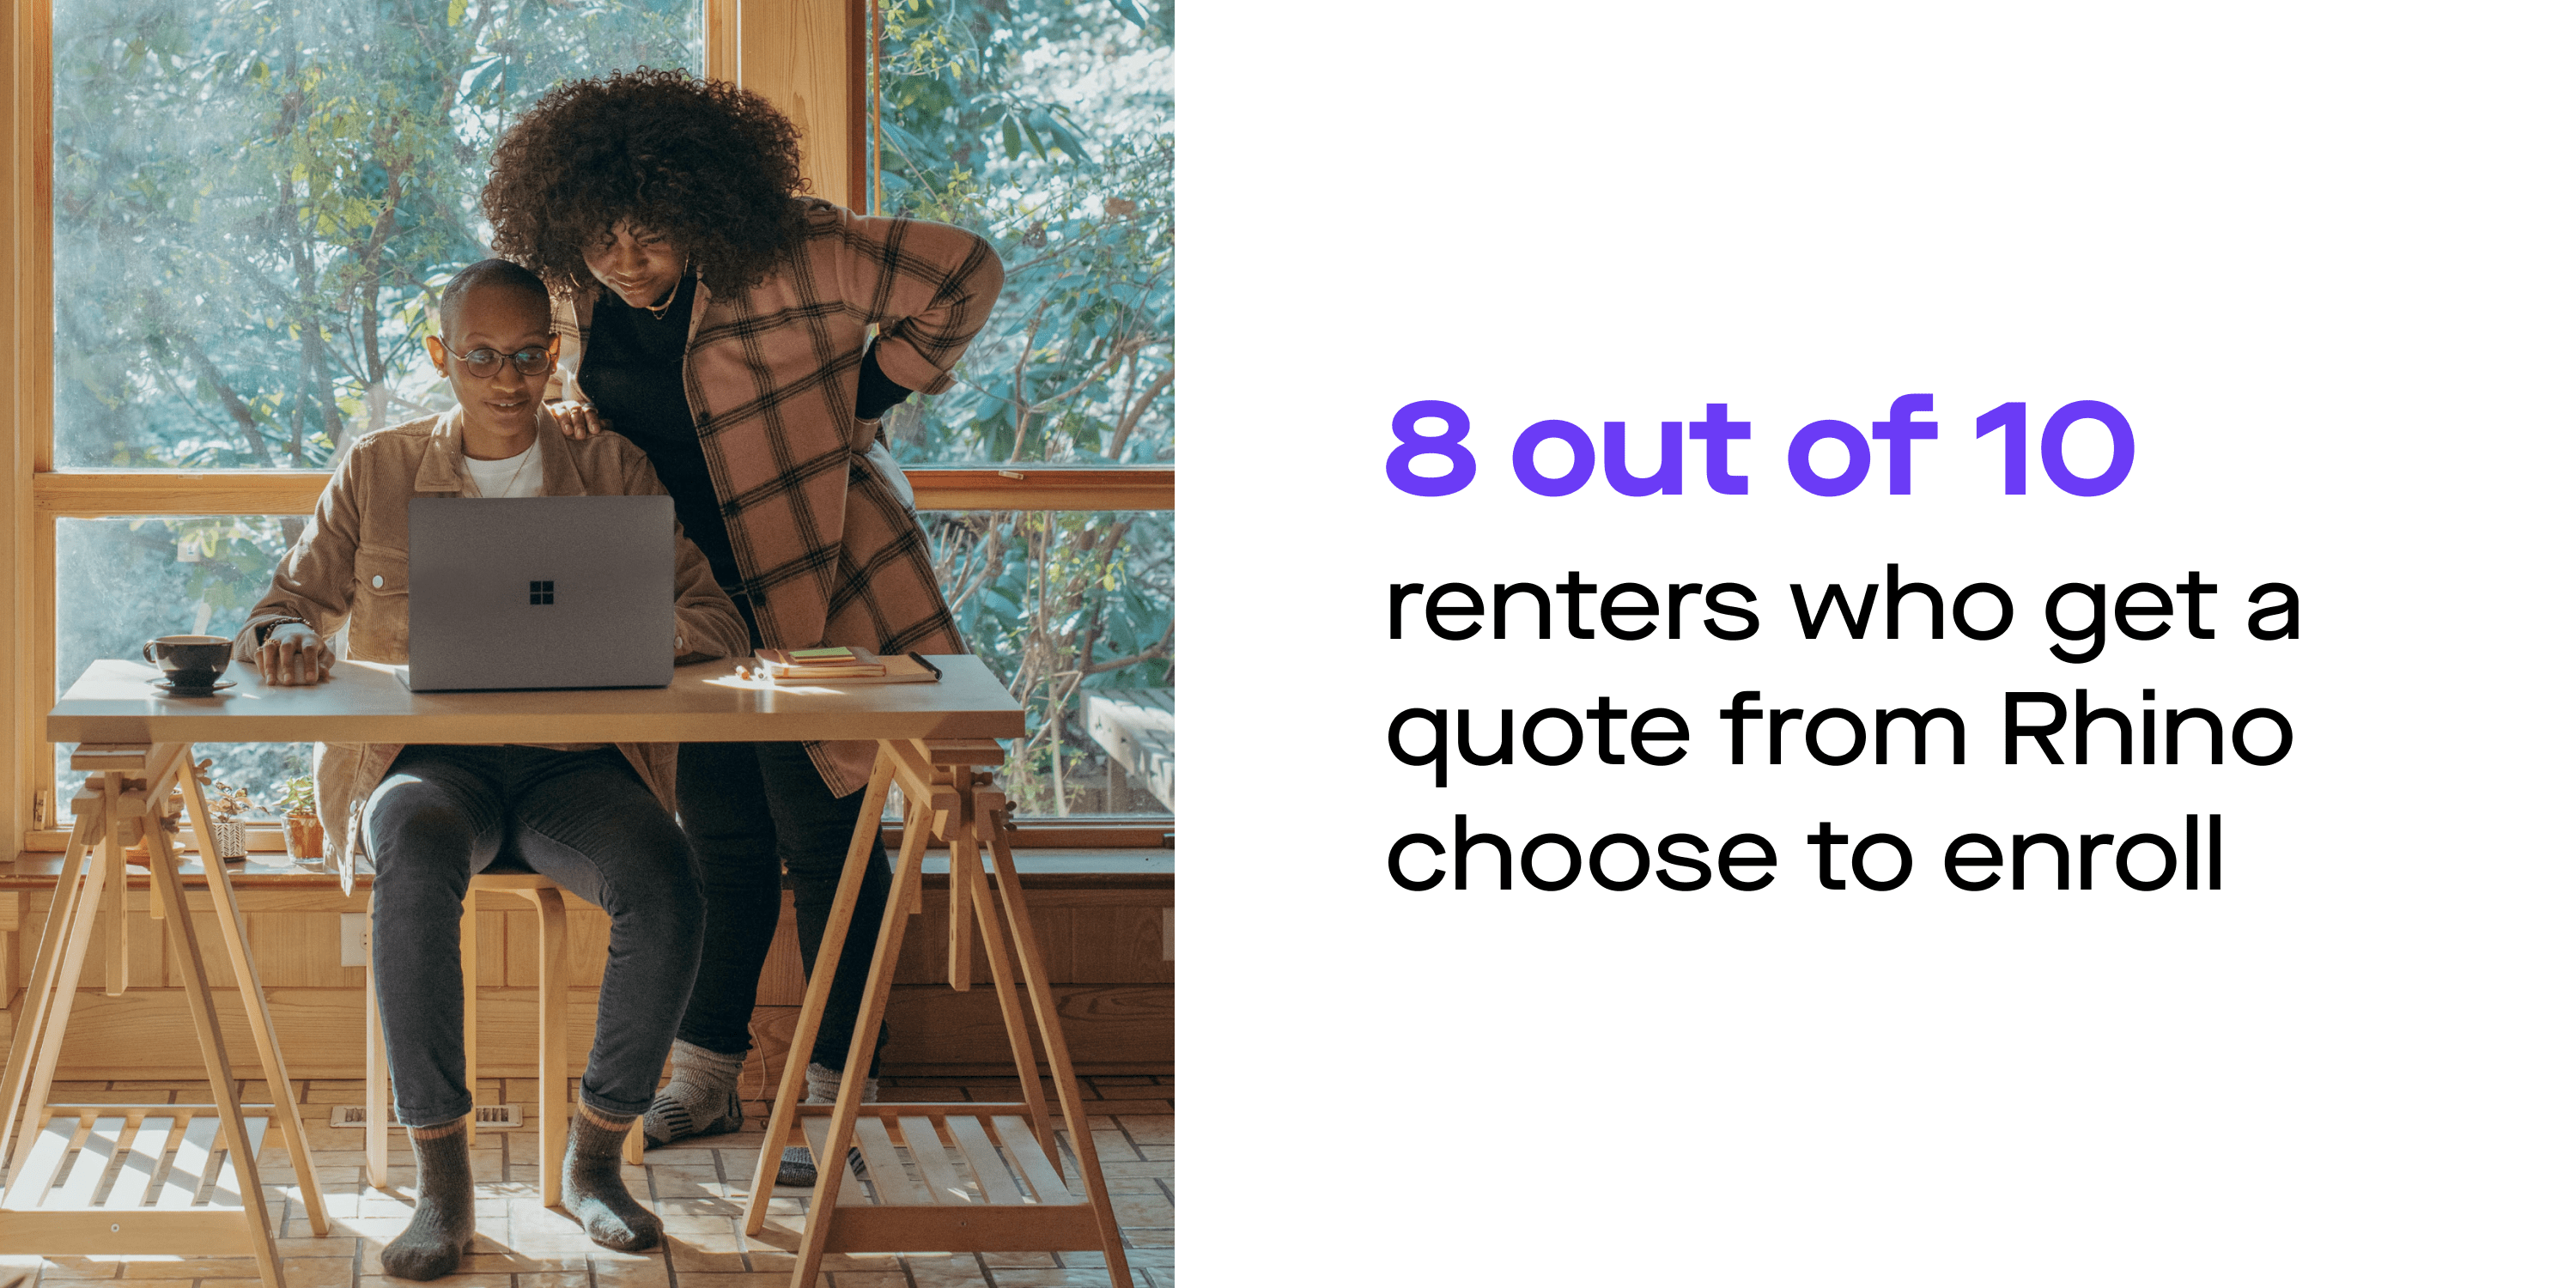 A graphic featuring a stat about renters who enroll with Rhino: 8 out of 10 renters who get a quote from Rhino choose to enroll 